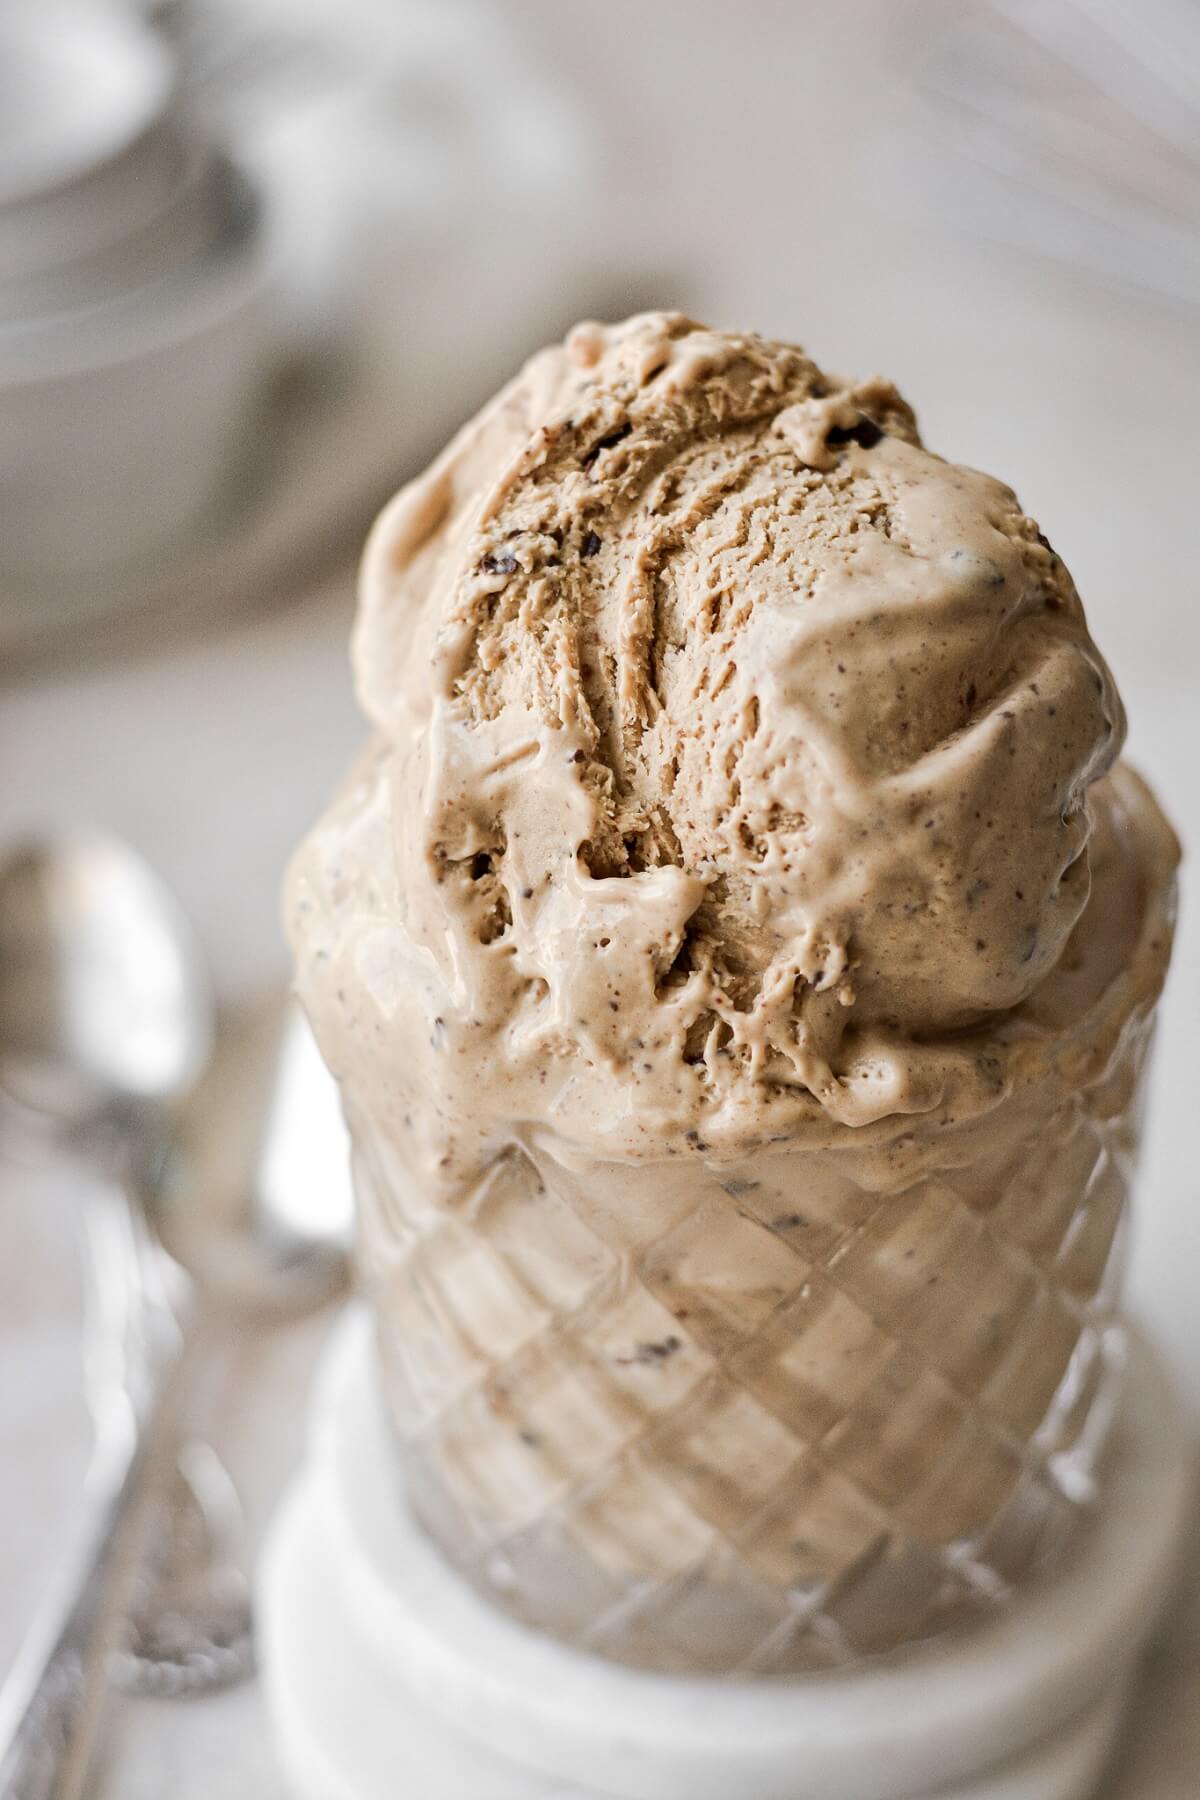 Peanut butter mocha chip ice cream melting down the side of a glass.